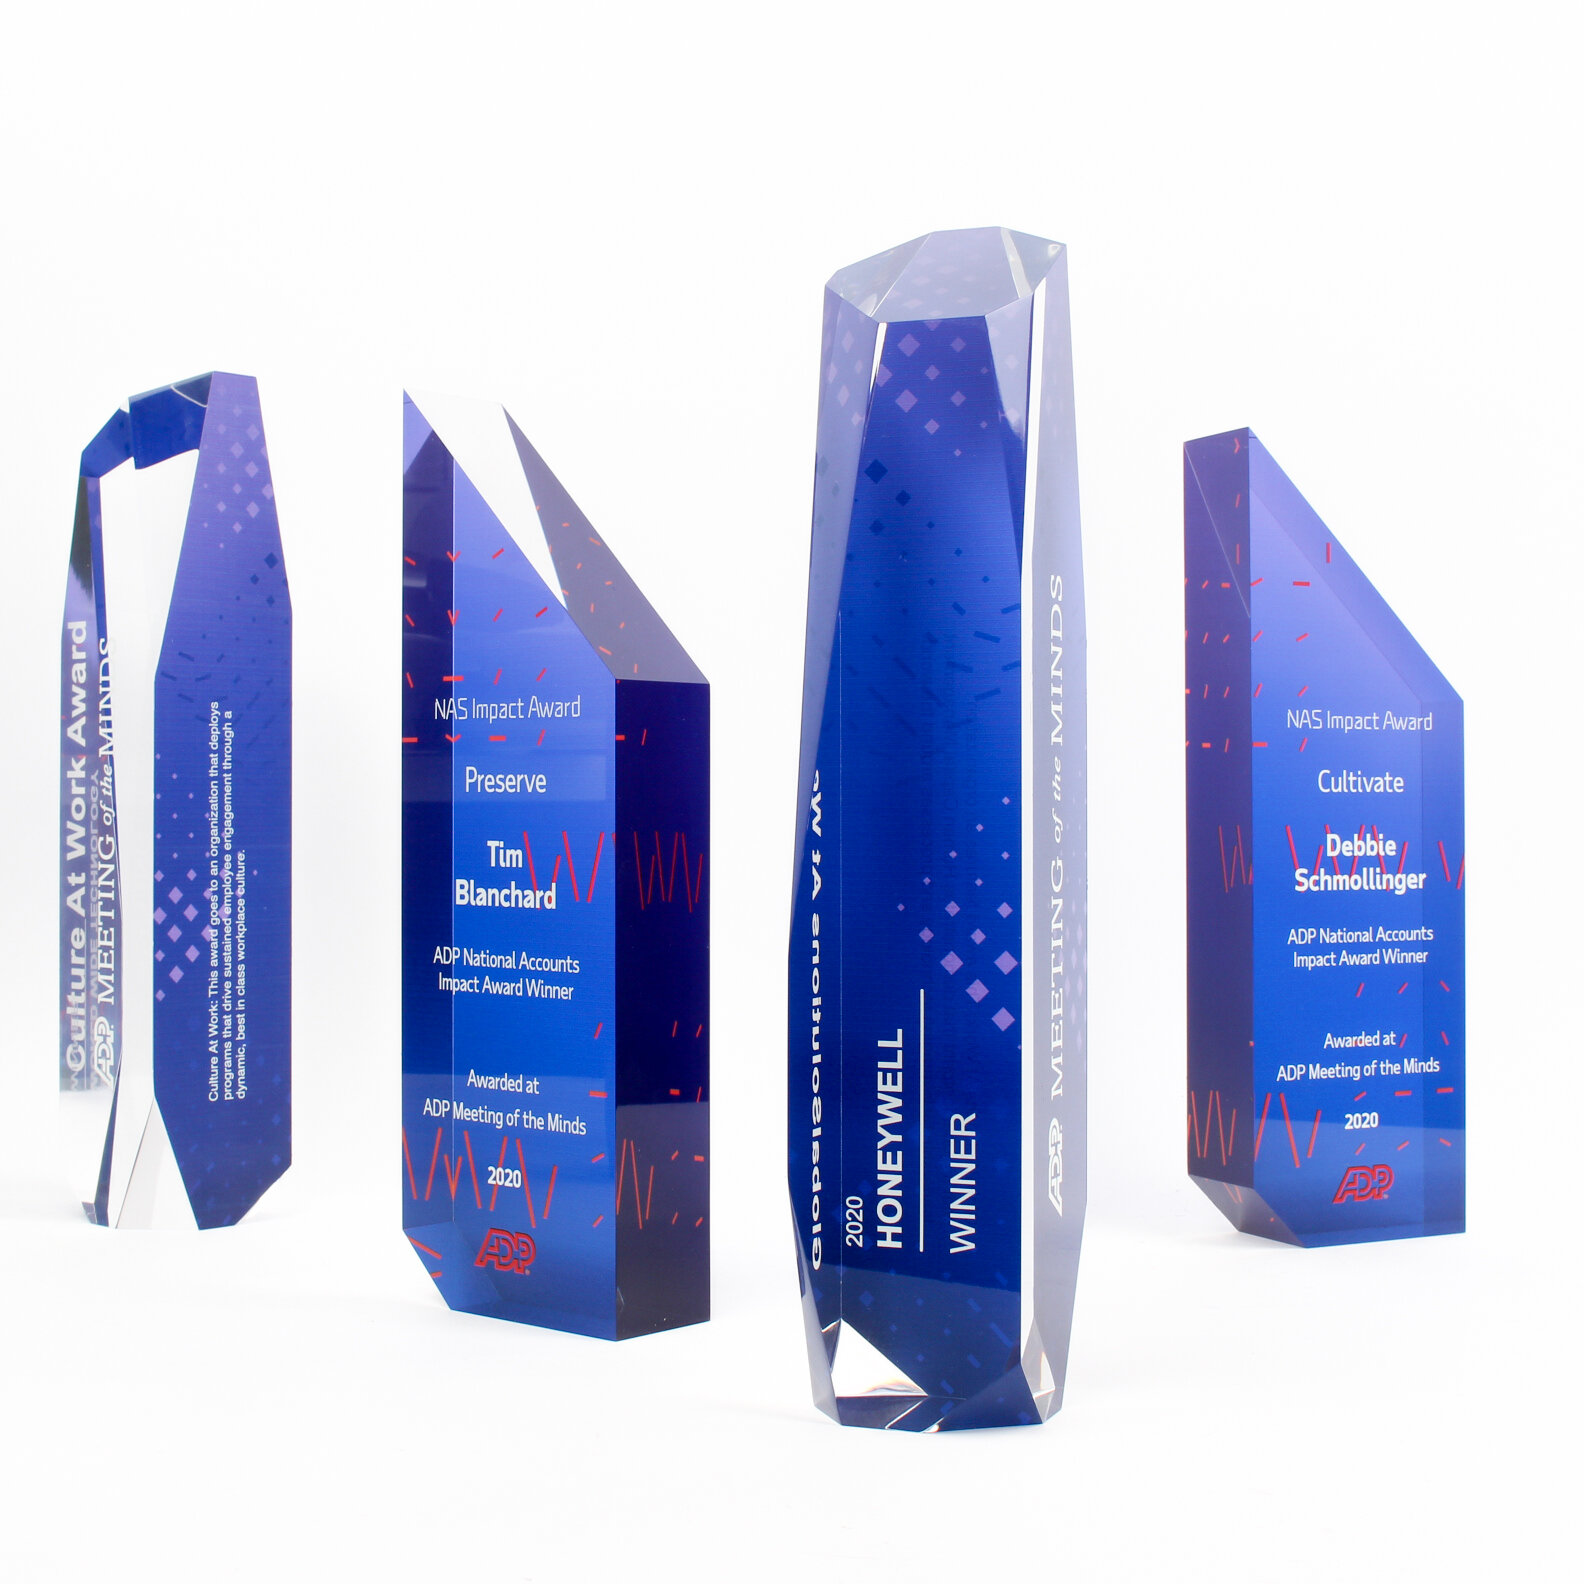 Combine our Shark Fin award with one of our other designs to create a tiered system. This example uses the Odyssey award as the overall winner and the Shark Fin as the secondary award. 